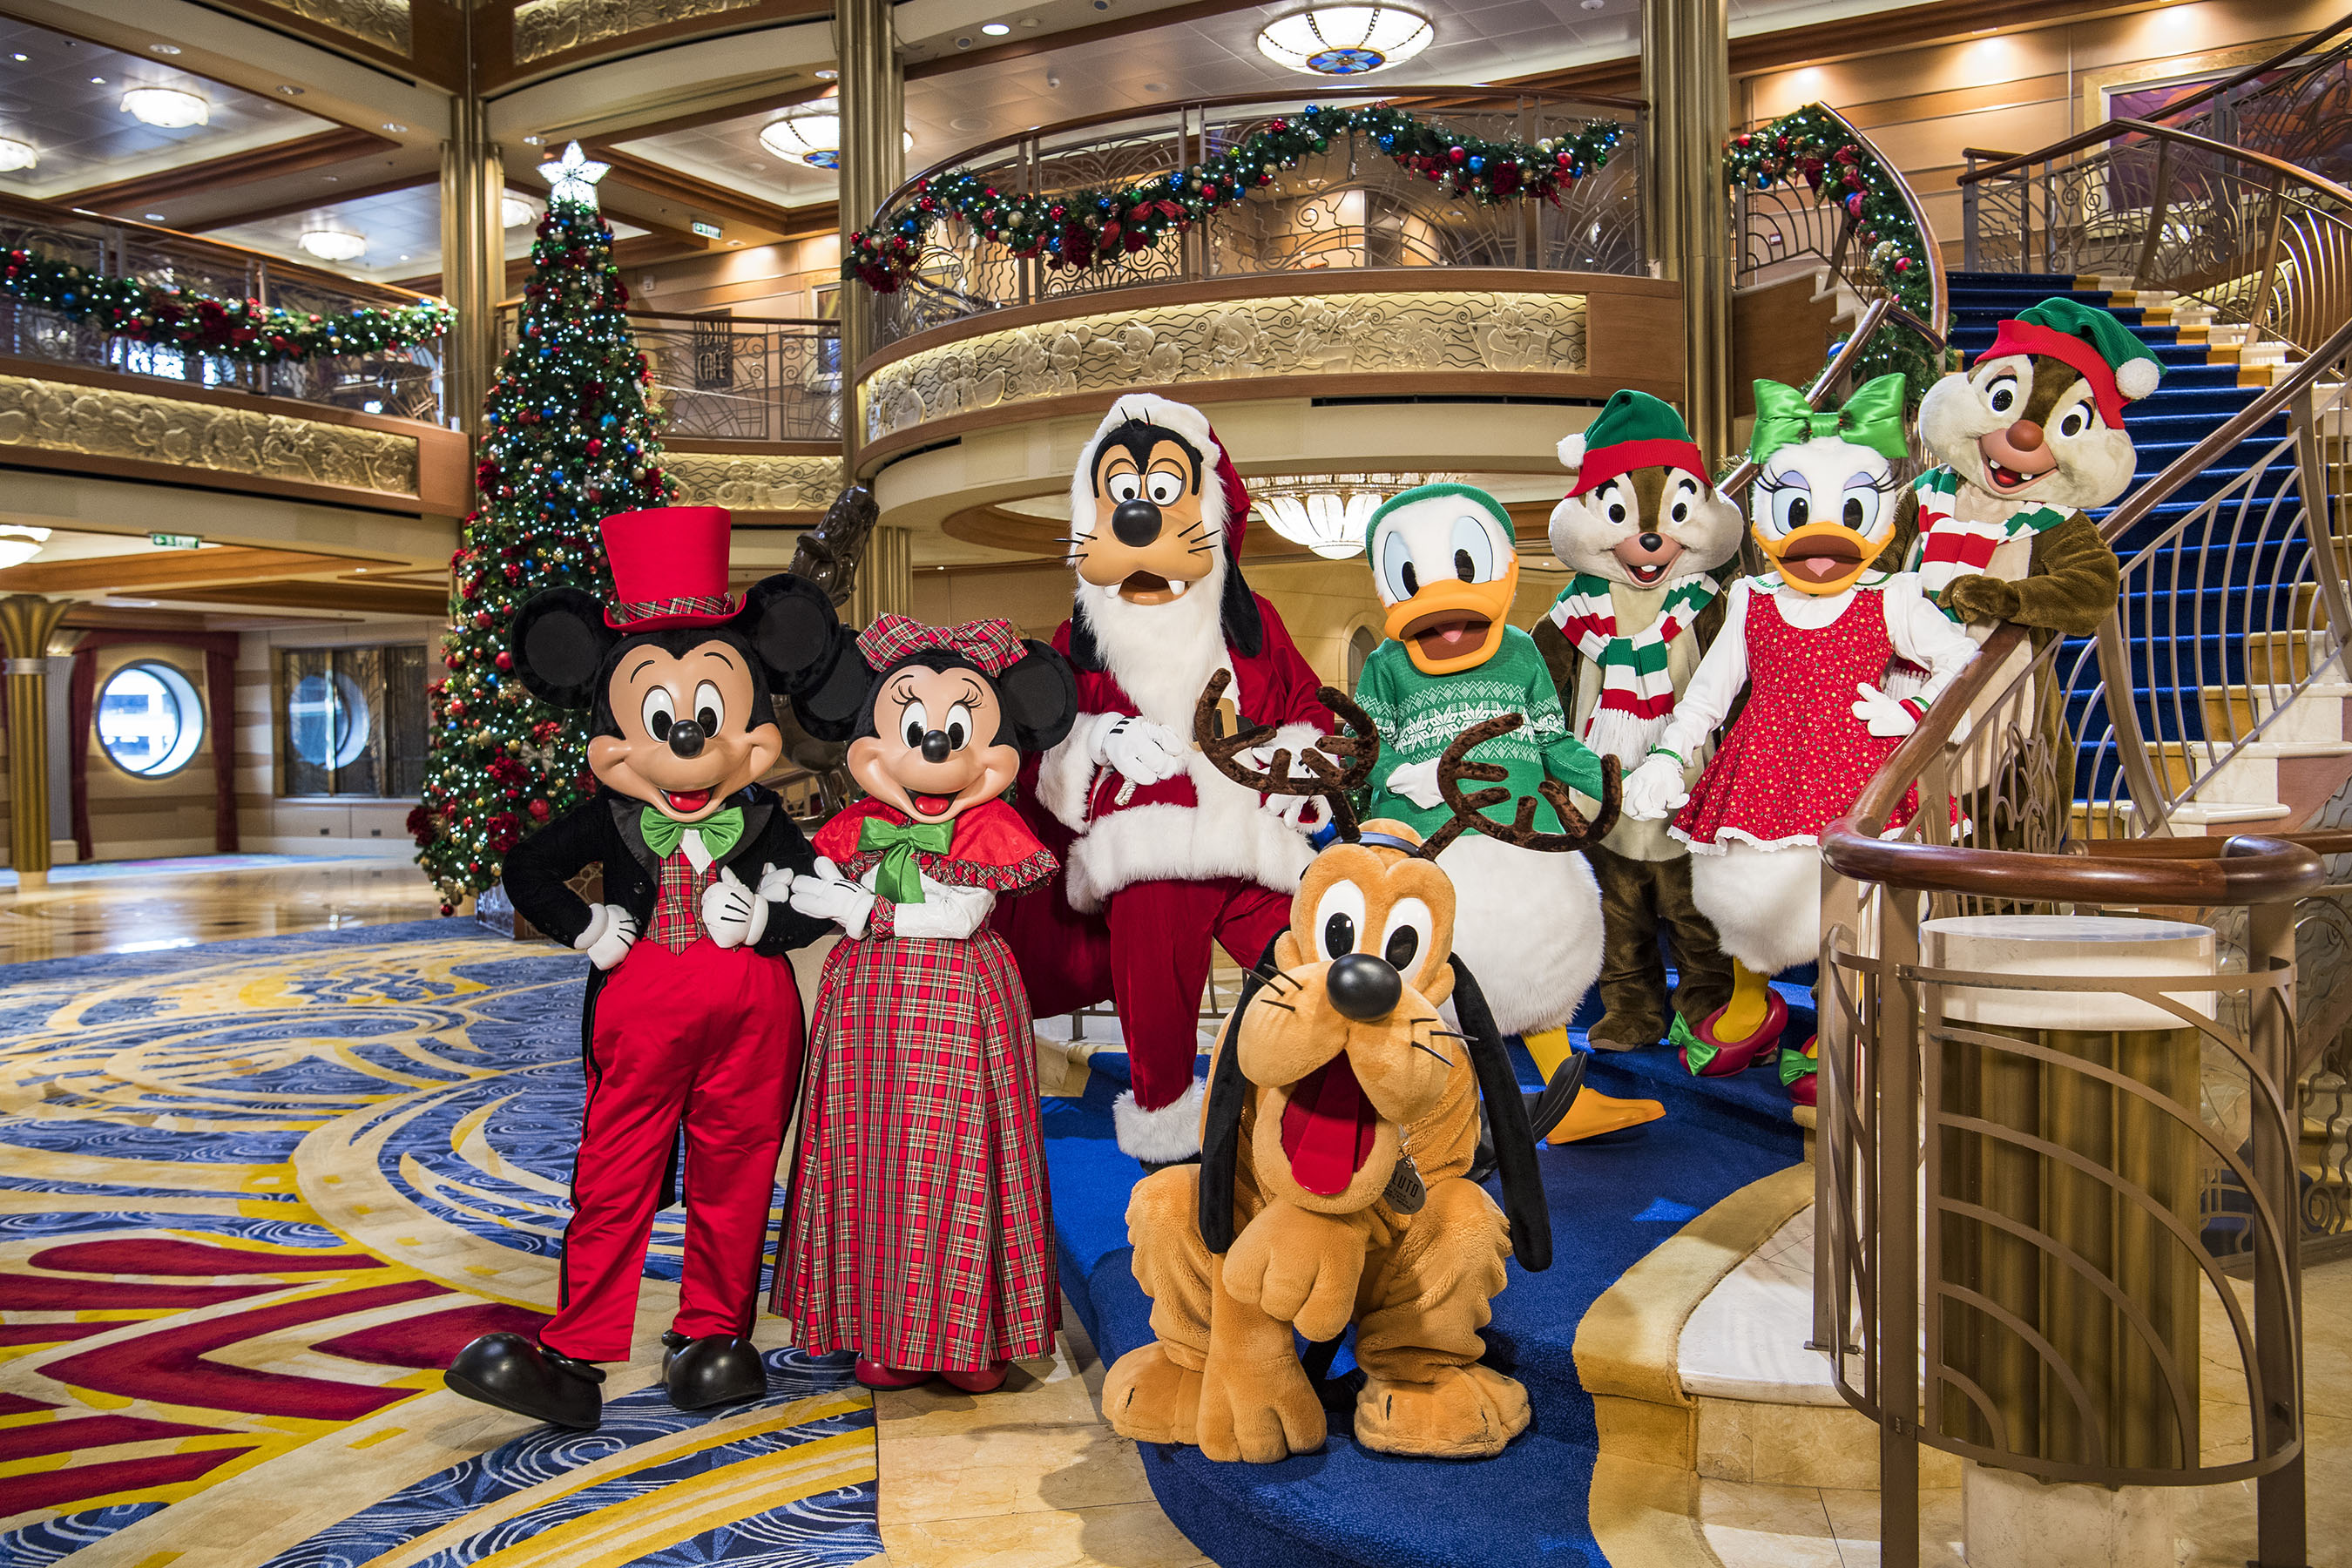 Disney Cruise Line Releases Several Deeply Discounted Military Rates and Other Fall Discounts